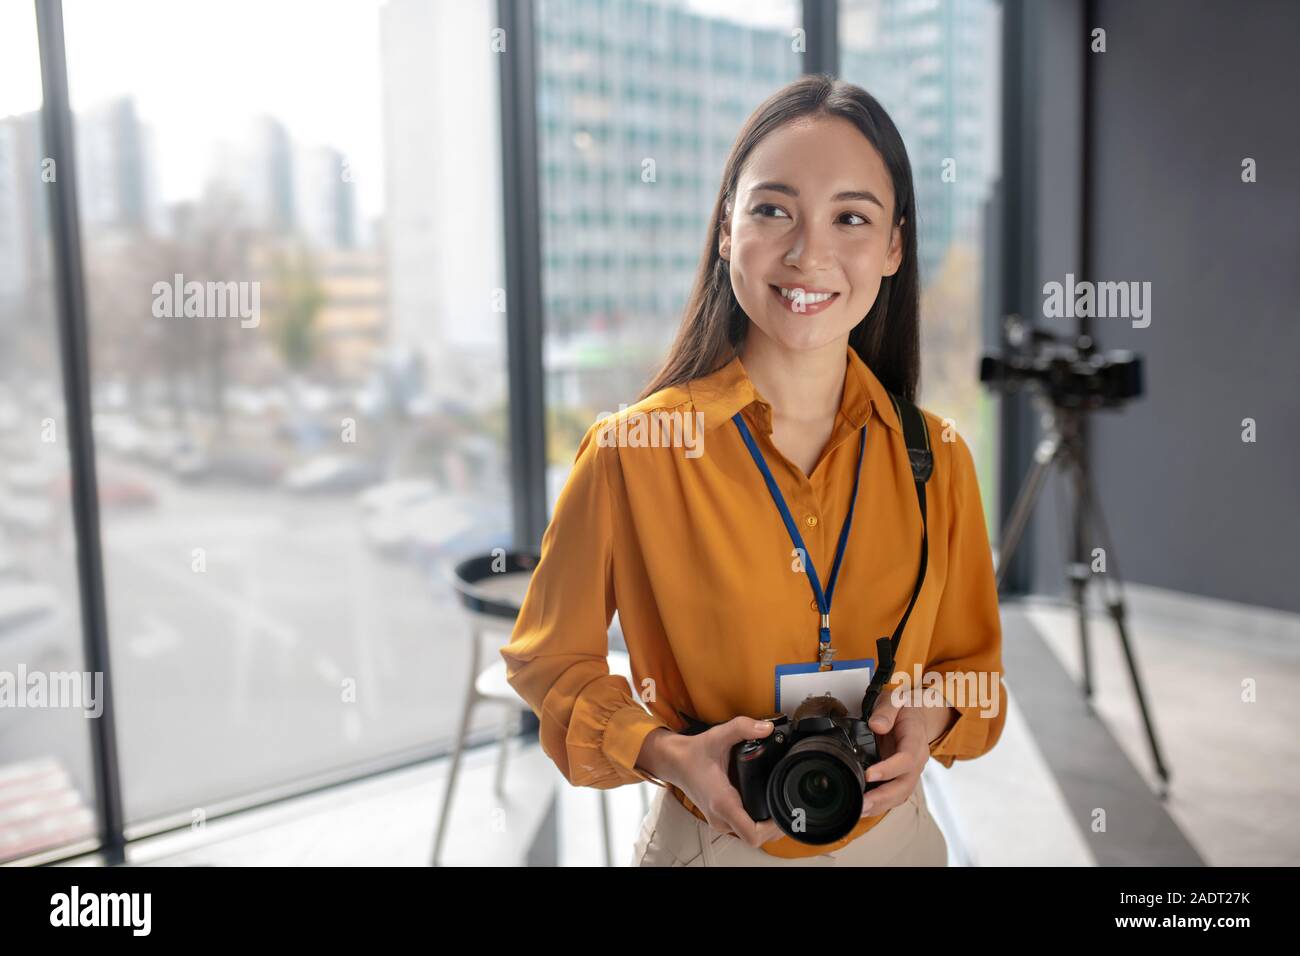 Dark-haired jeune reporter holding a camera Banque D'Images